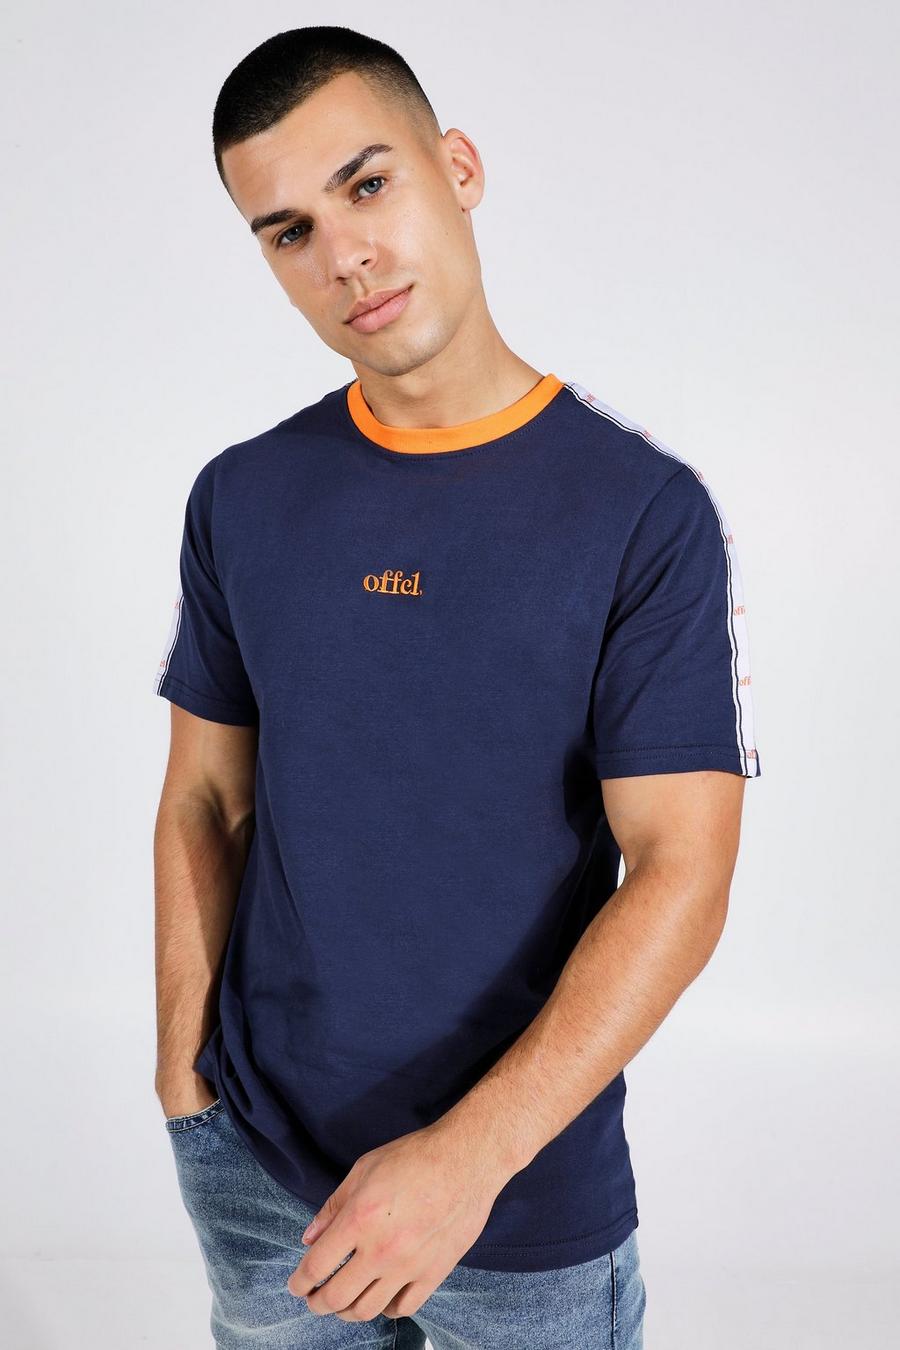 T-shirt Slim Fit Official con bordi a contrasto e strisce laterali, Navy azul marino image number 1